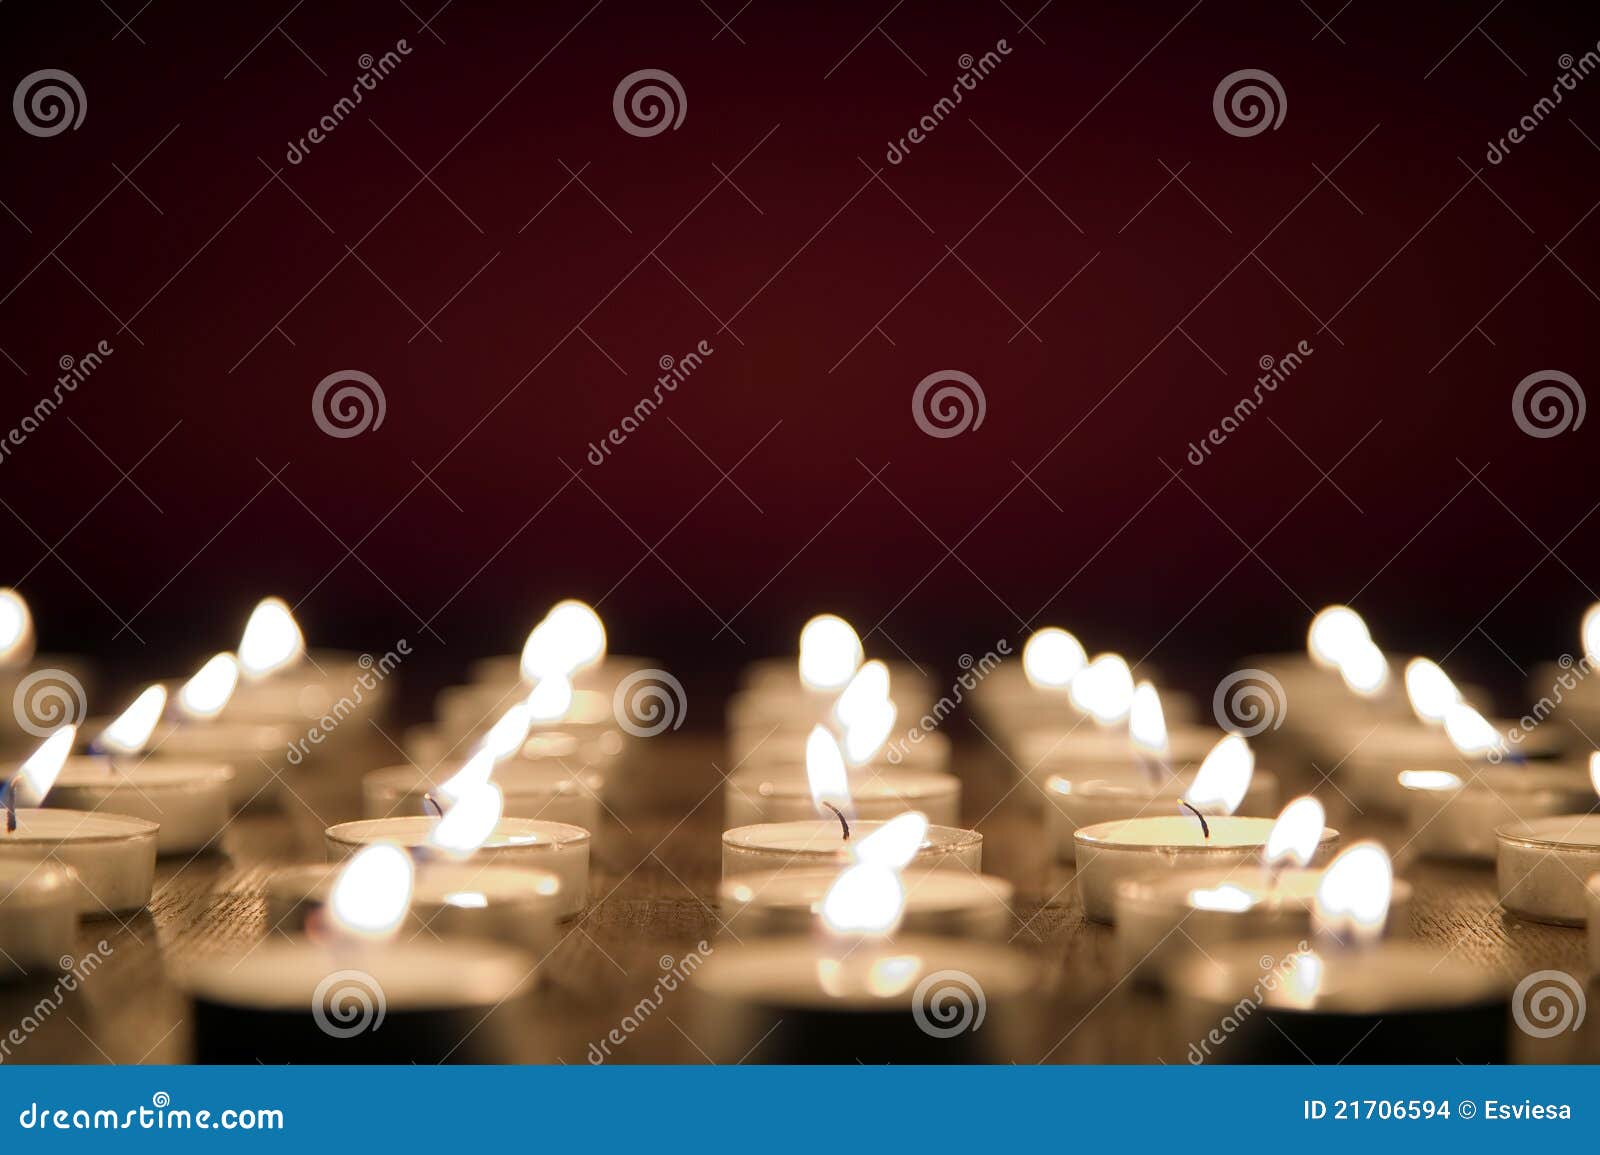 candles on red background, all saints day concept